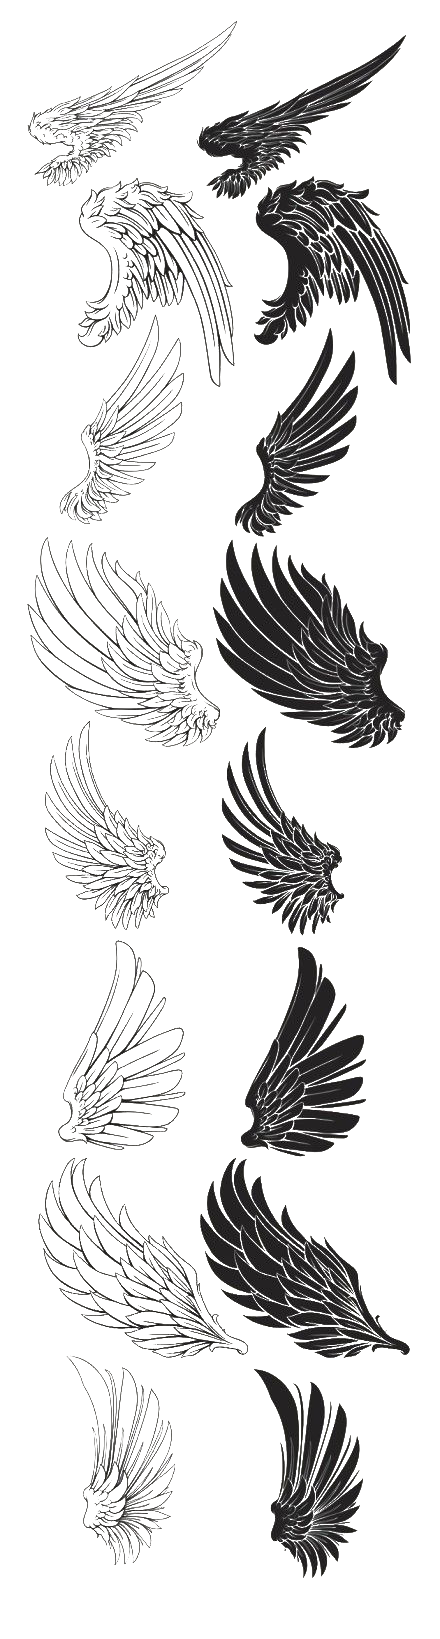 Eagle Feather Drawing Wings Brush Free Transparent Image HQ Clipart